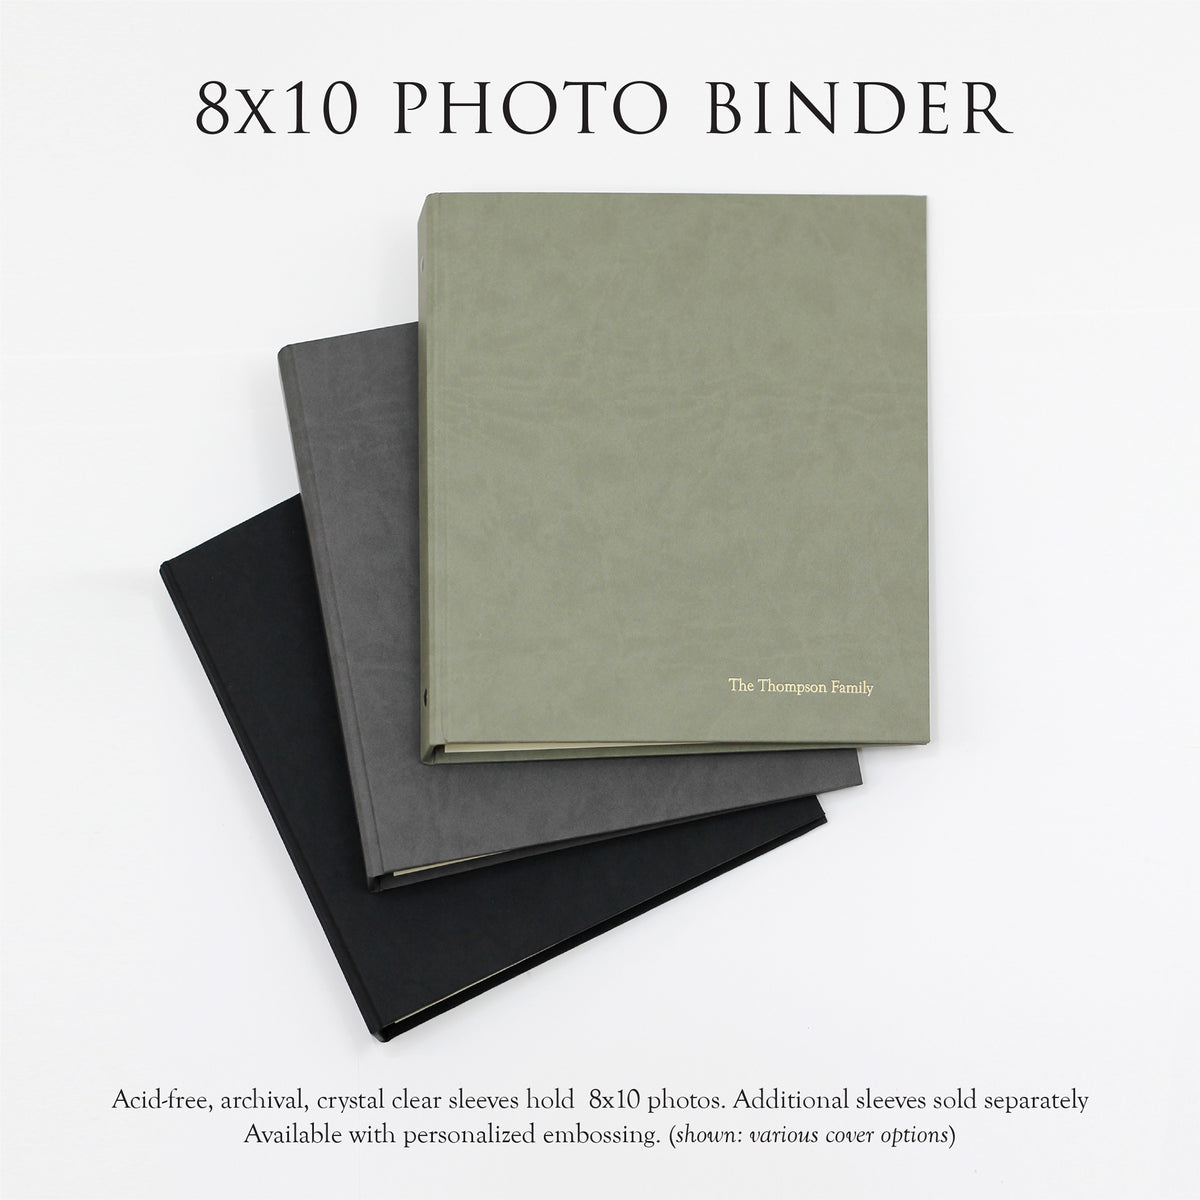 Large Photo Binder For 8x10 Photos | Cover: Mocha Vegan Leather | Available Personalized